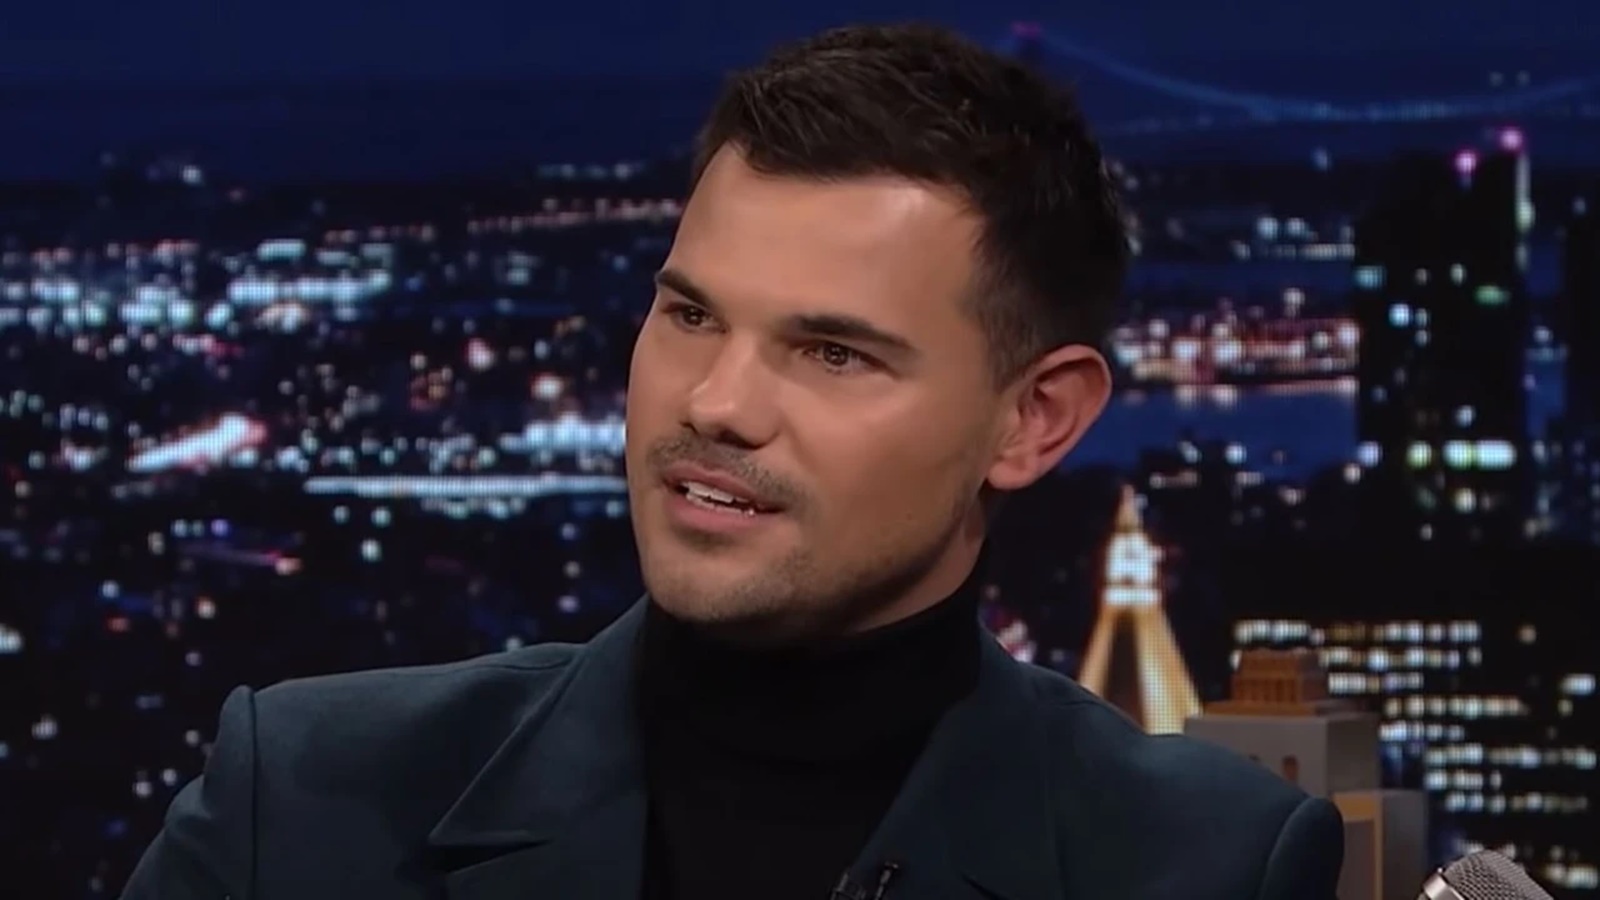 Taylor Lautner replies to those who think he has aged badly: 'Critics don't hurt me.  be kind'